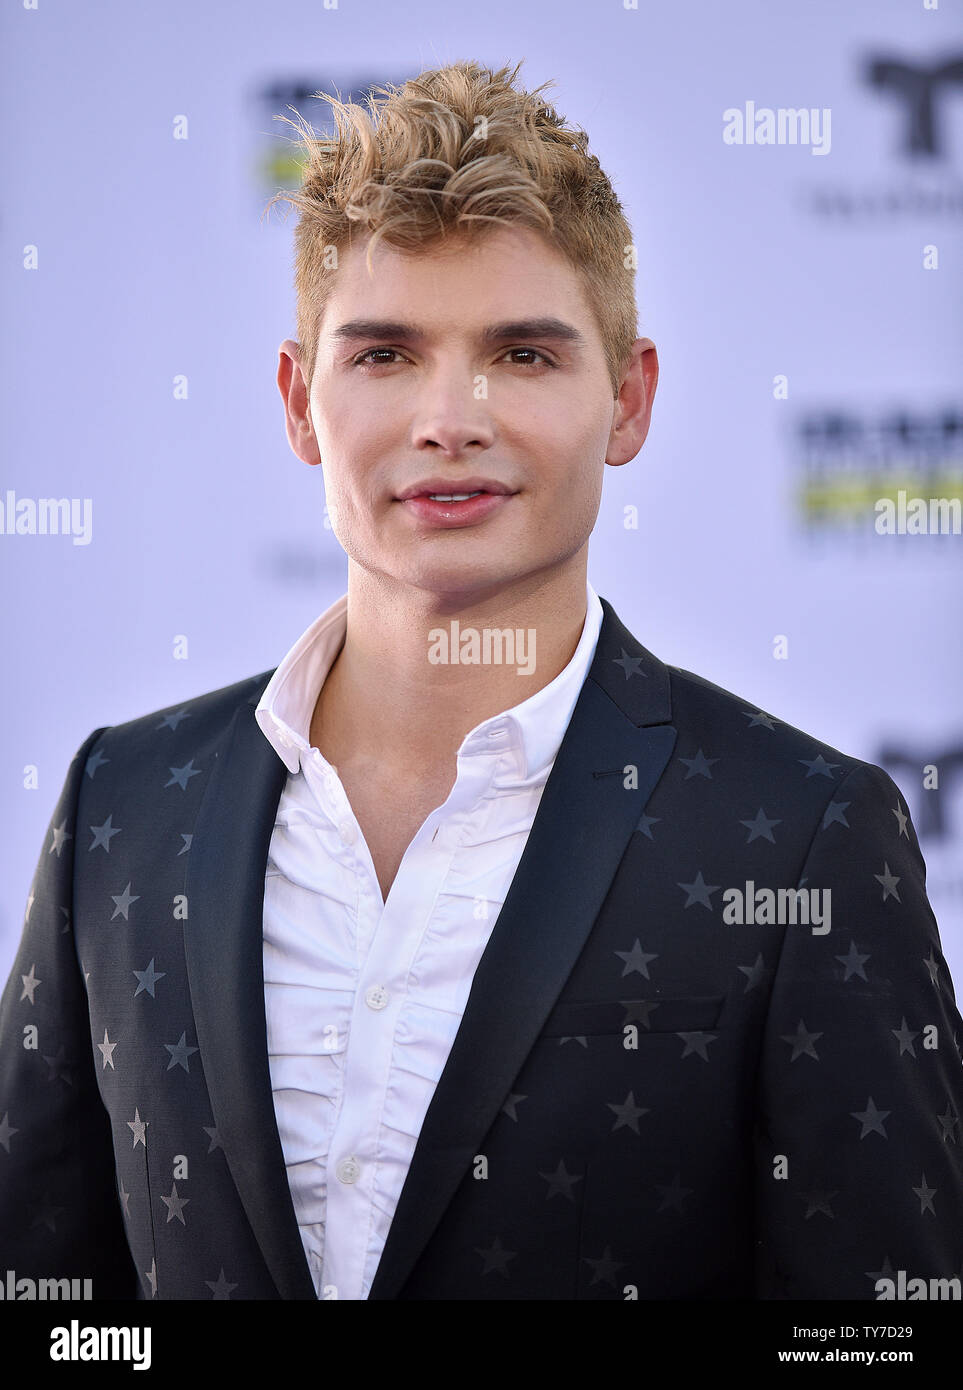 Christian Acosta arrives for the Latin American Music Awards 2017 at Hollywood's Dolby Theatre in Los Angeles on October 26, 2017. Photo by Christine Chew/UPI Stock Photo